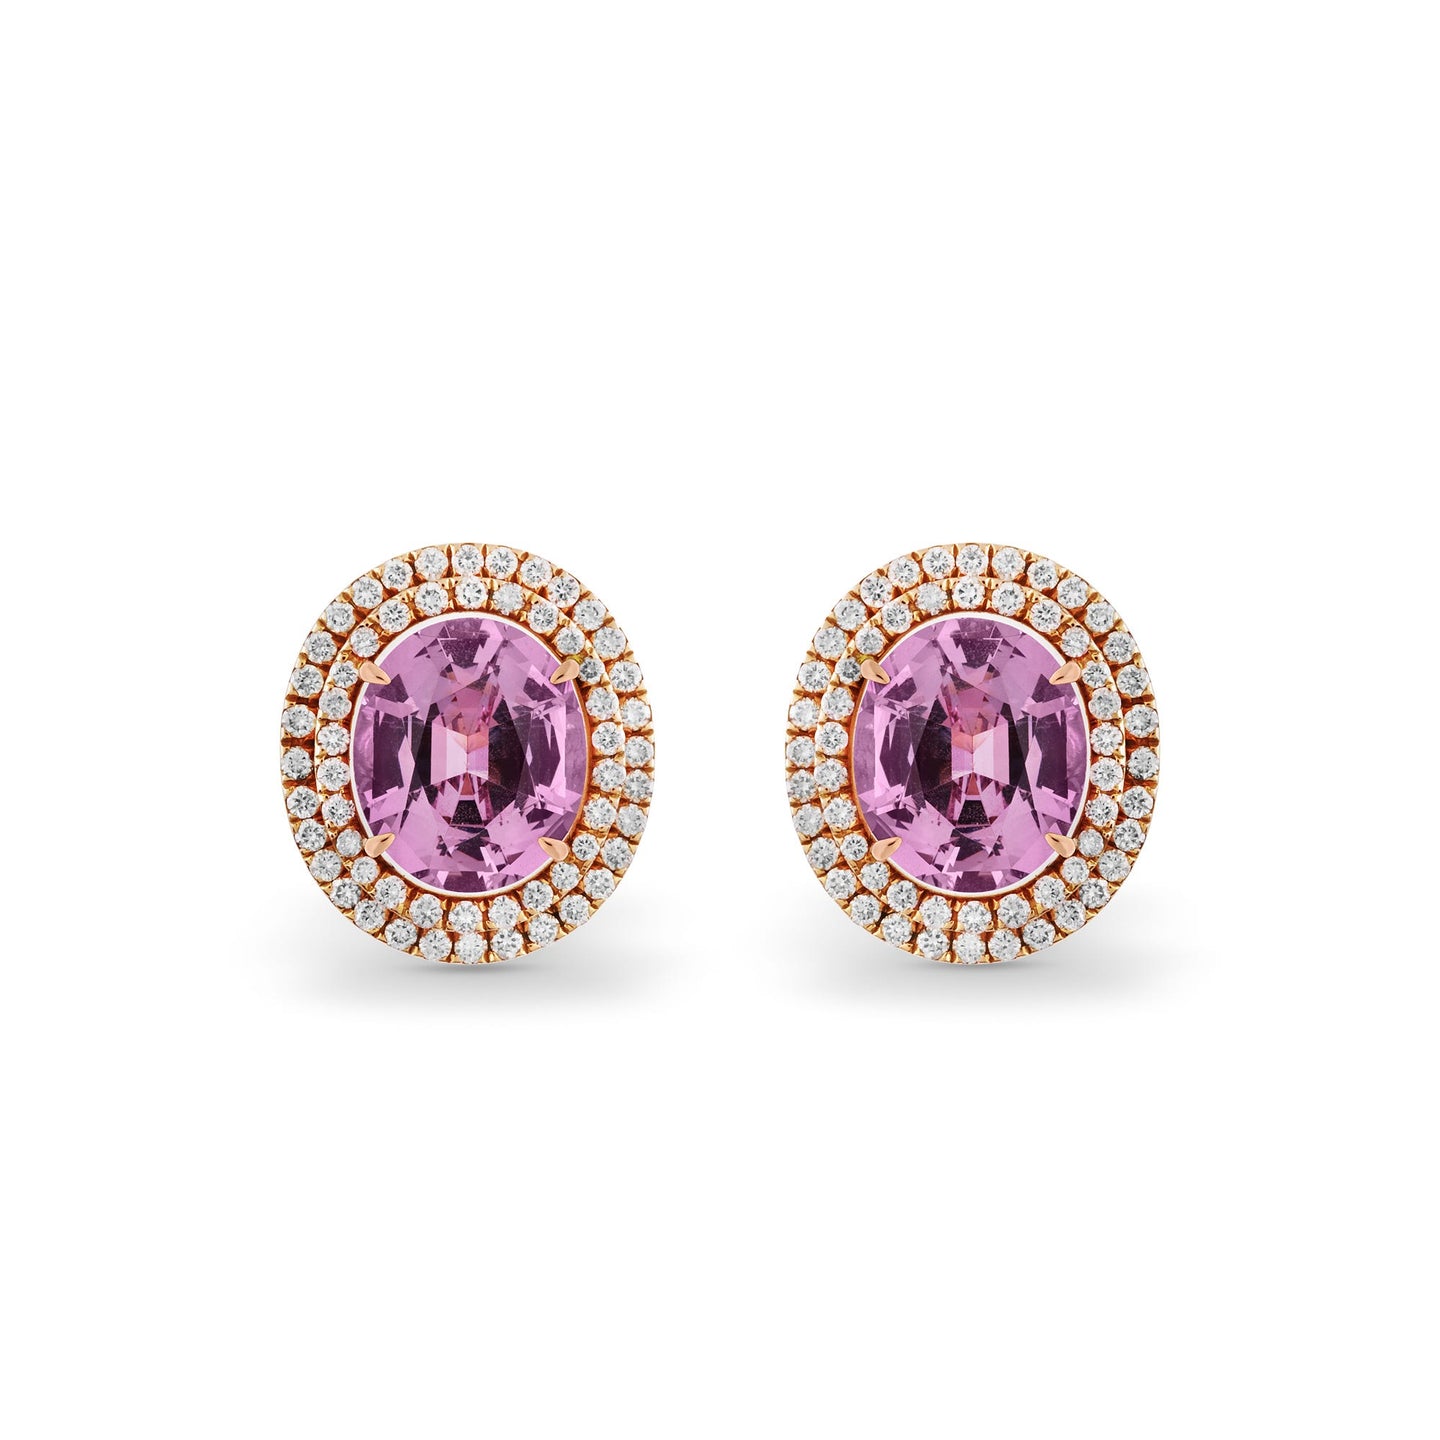 Earrings in 18ct Rose Gold with Oval Pastel Pink Spinel and Diamonds